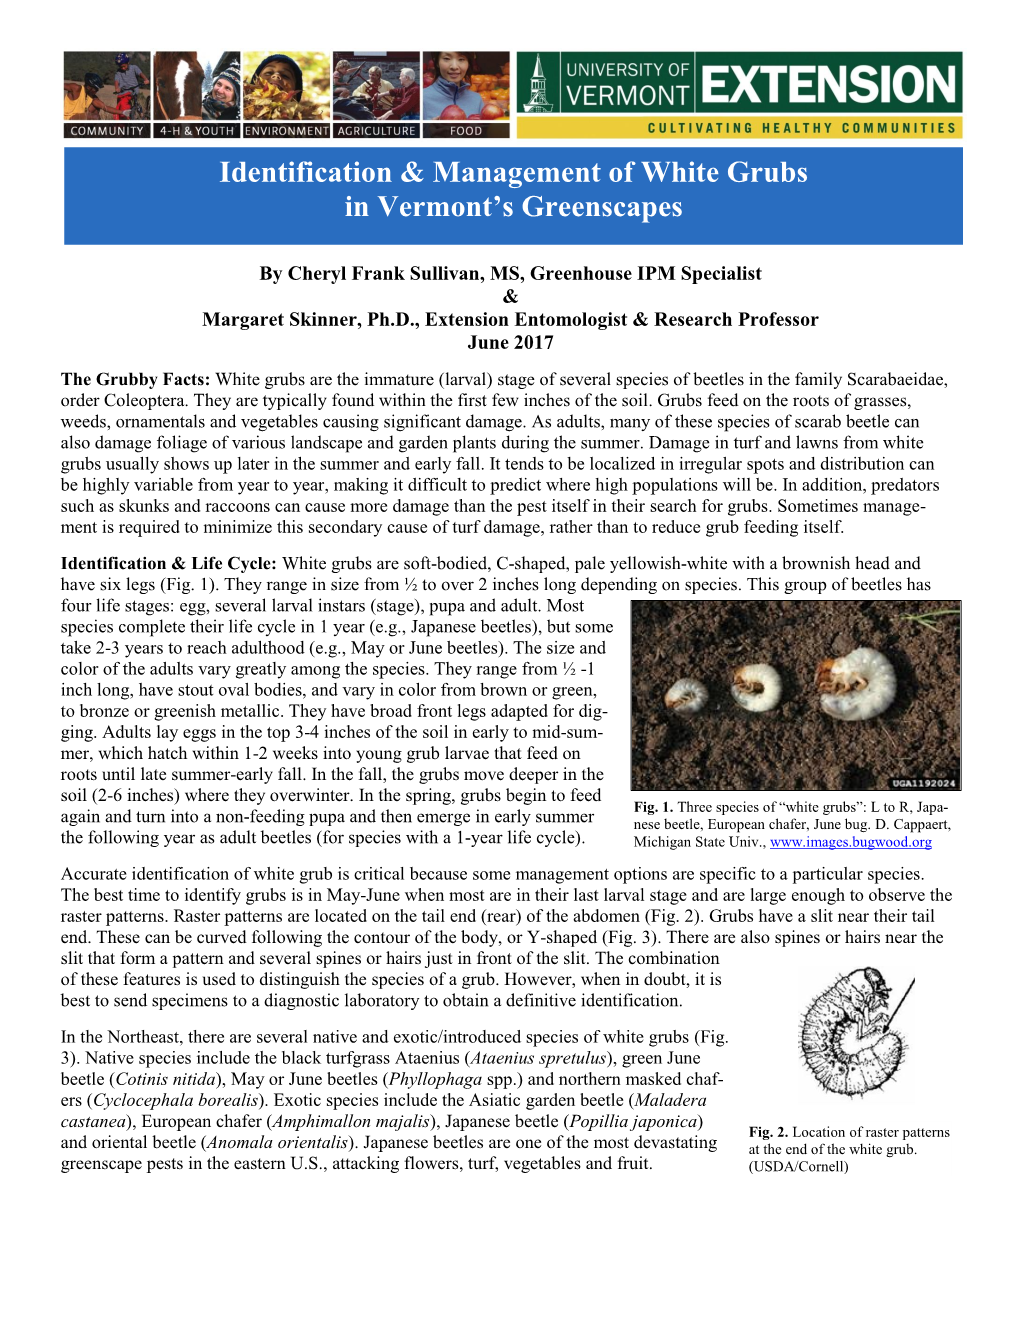 Identification & Management of White Grubs in Vermont's Greenscapes